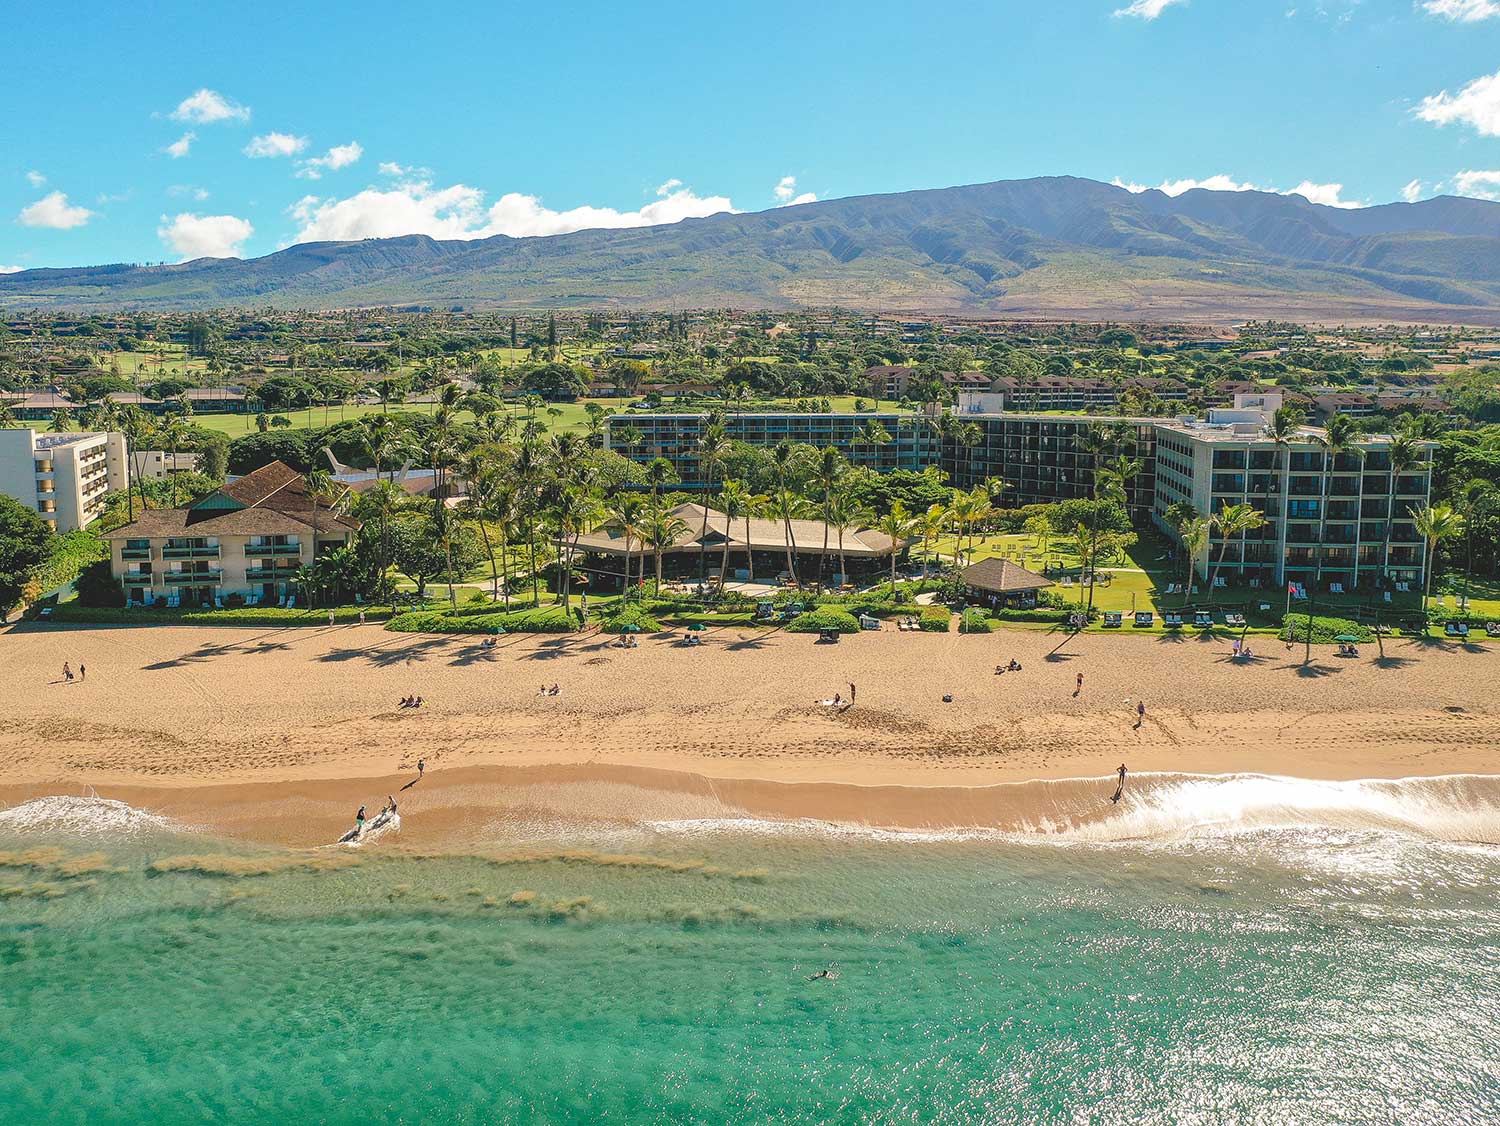 An exterior view of the Kā‘anapali Beach Hotel on the island of Maui in Hawaii.